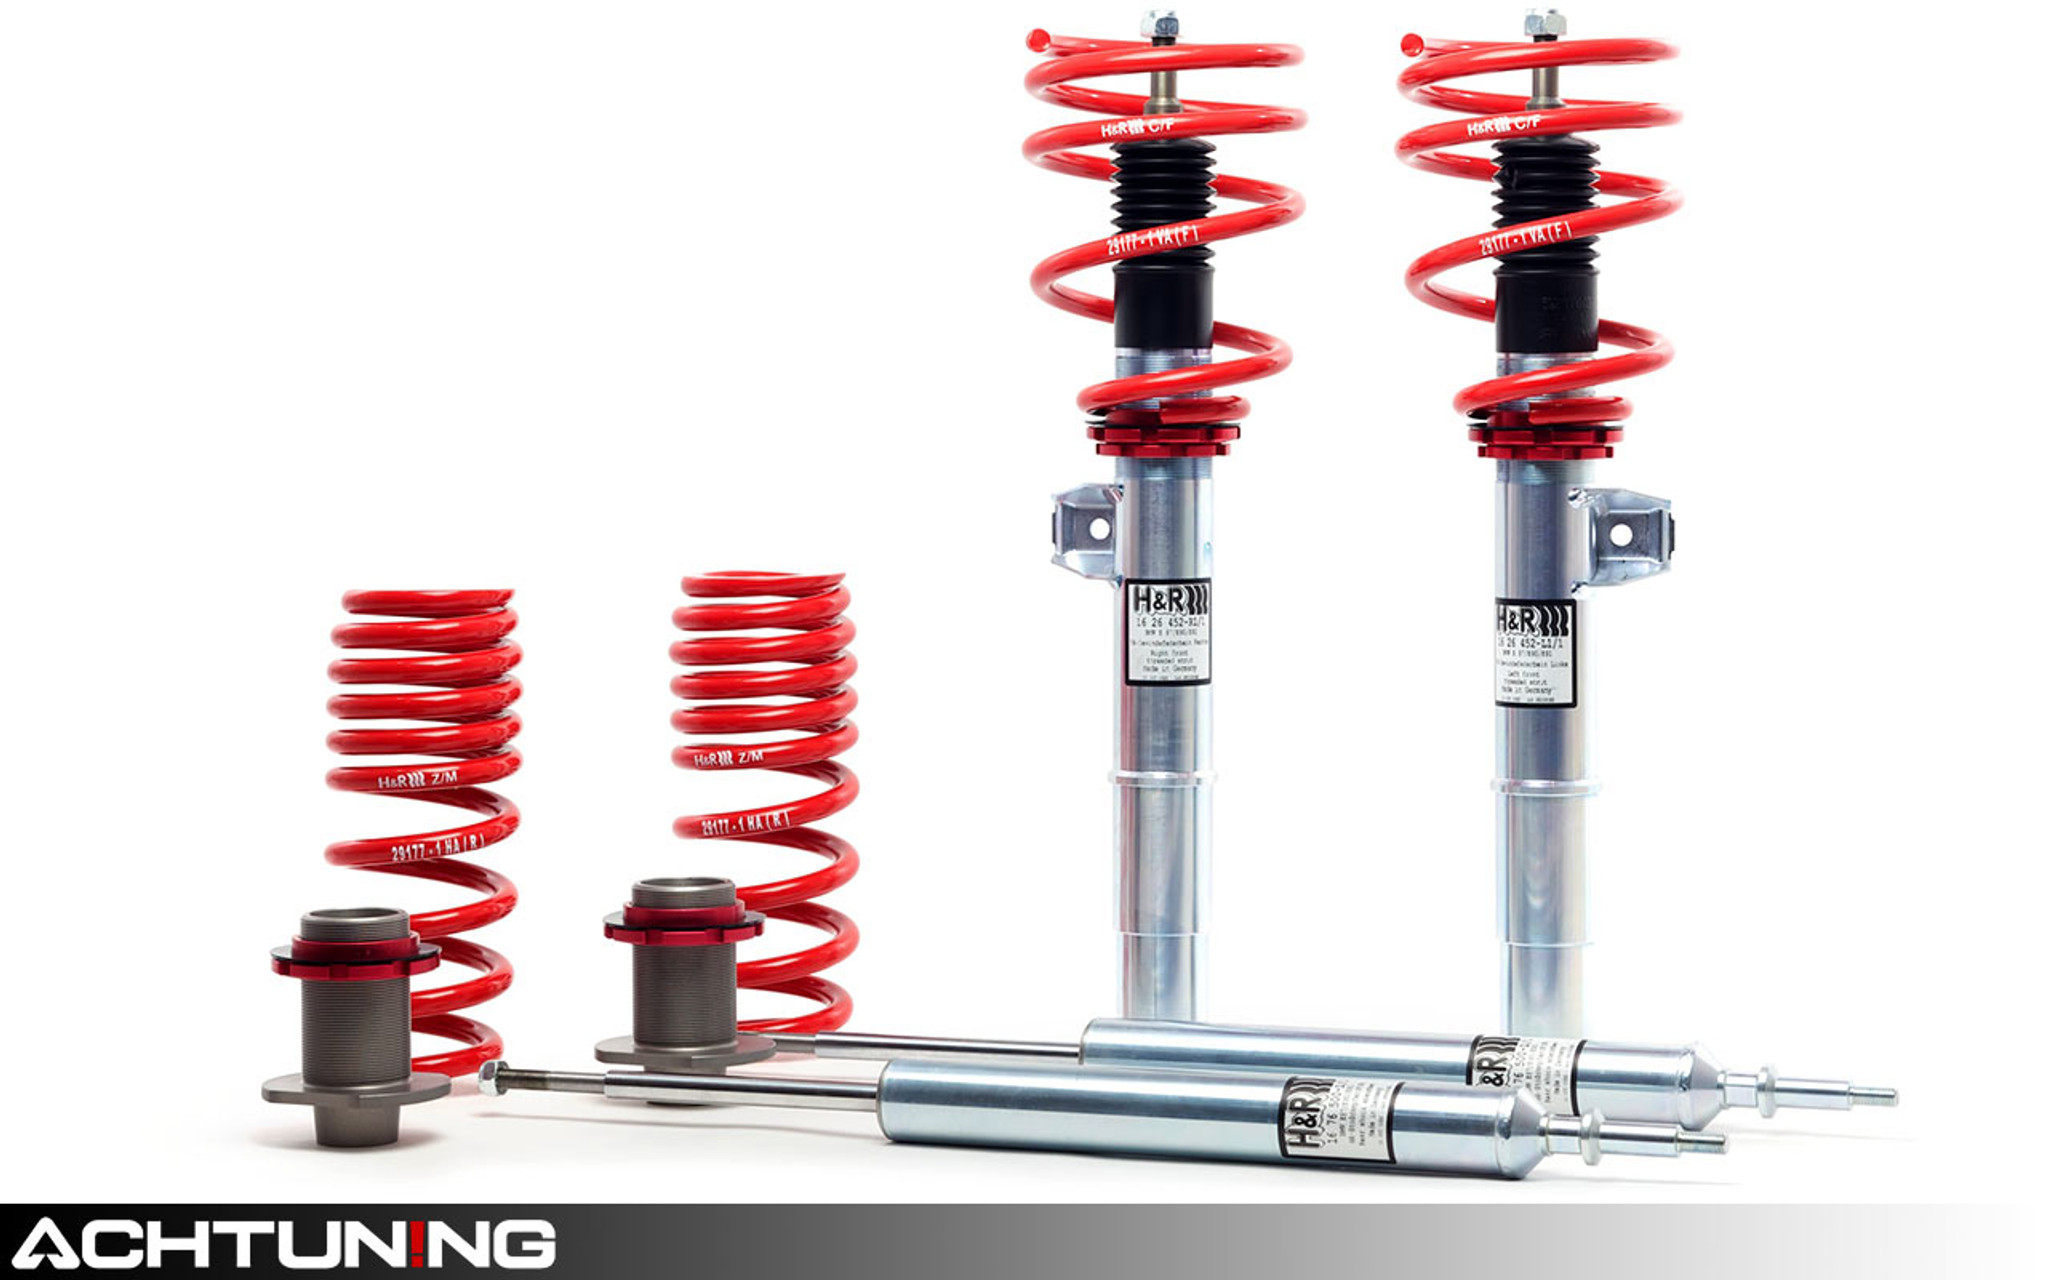 H&R 50495 Street Performance Coil-Over Spring